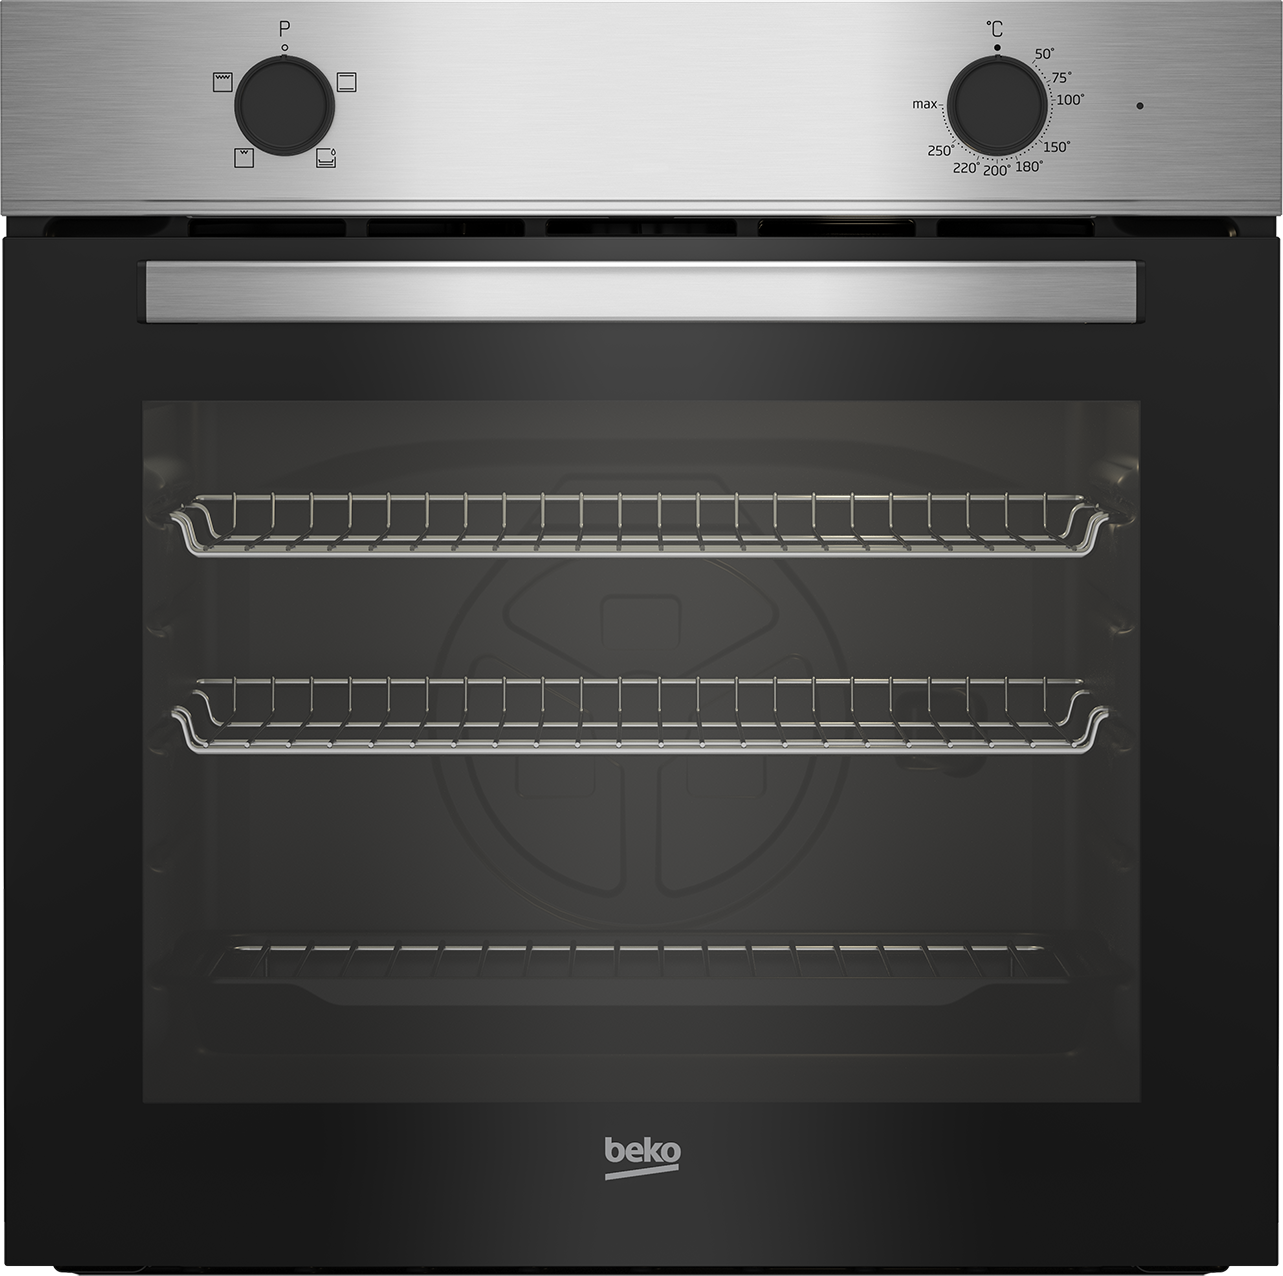 Beko RecycledNet BBRIC21000X Built In Electric Single Oven - Stainless Steel - A Rated, Stainless Steel